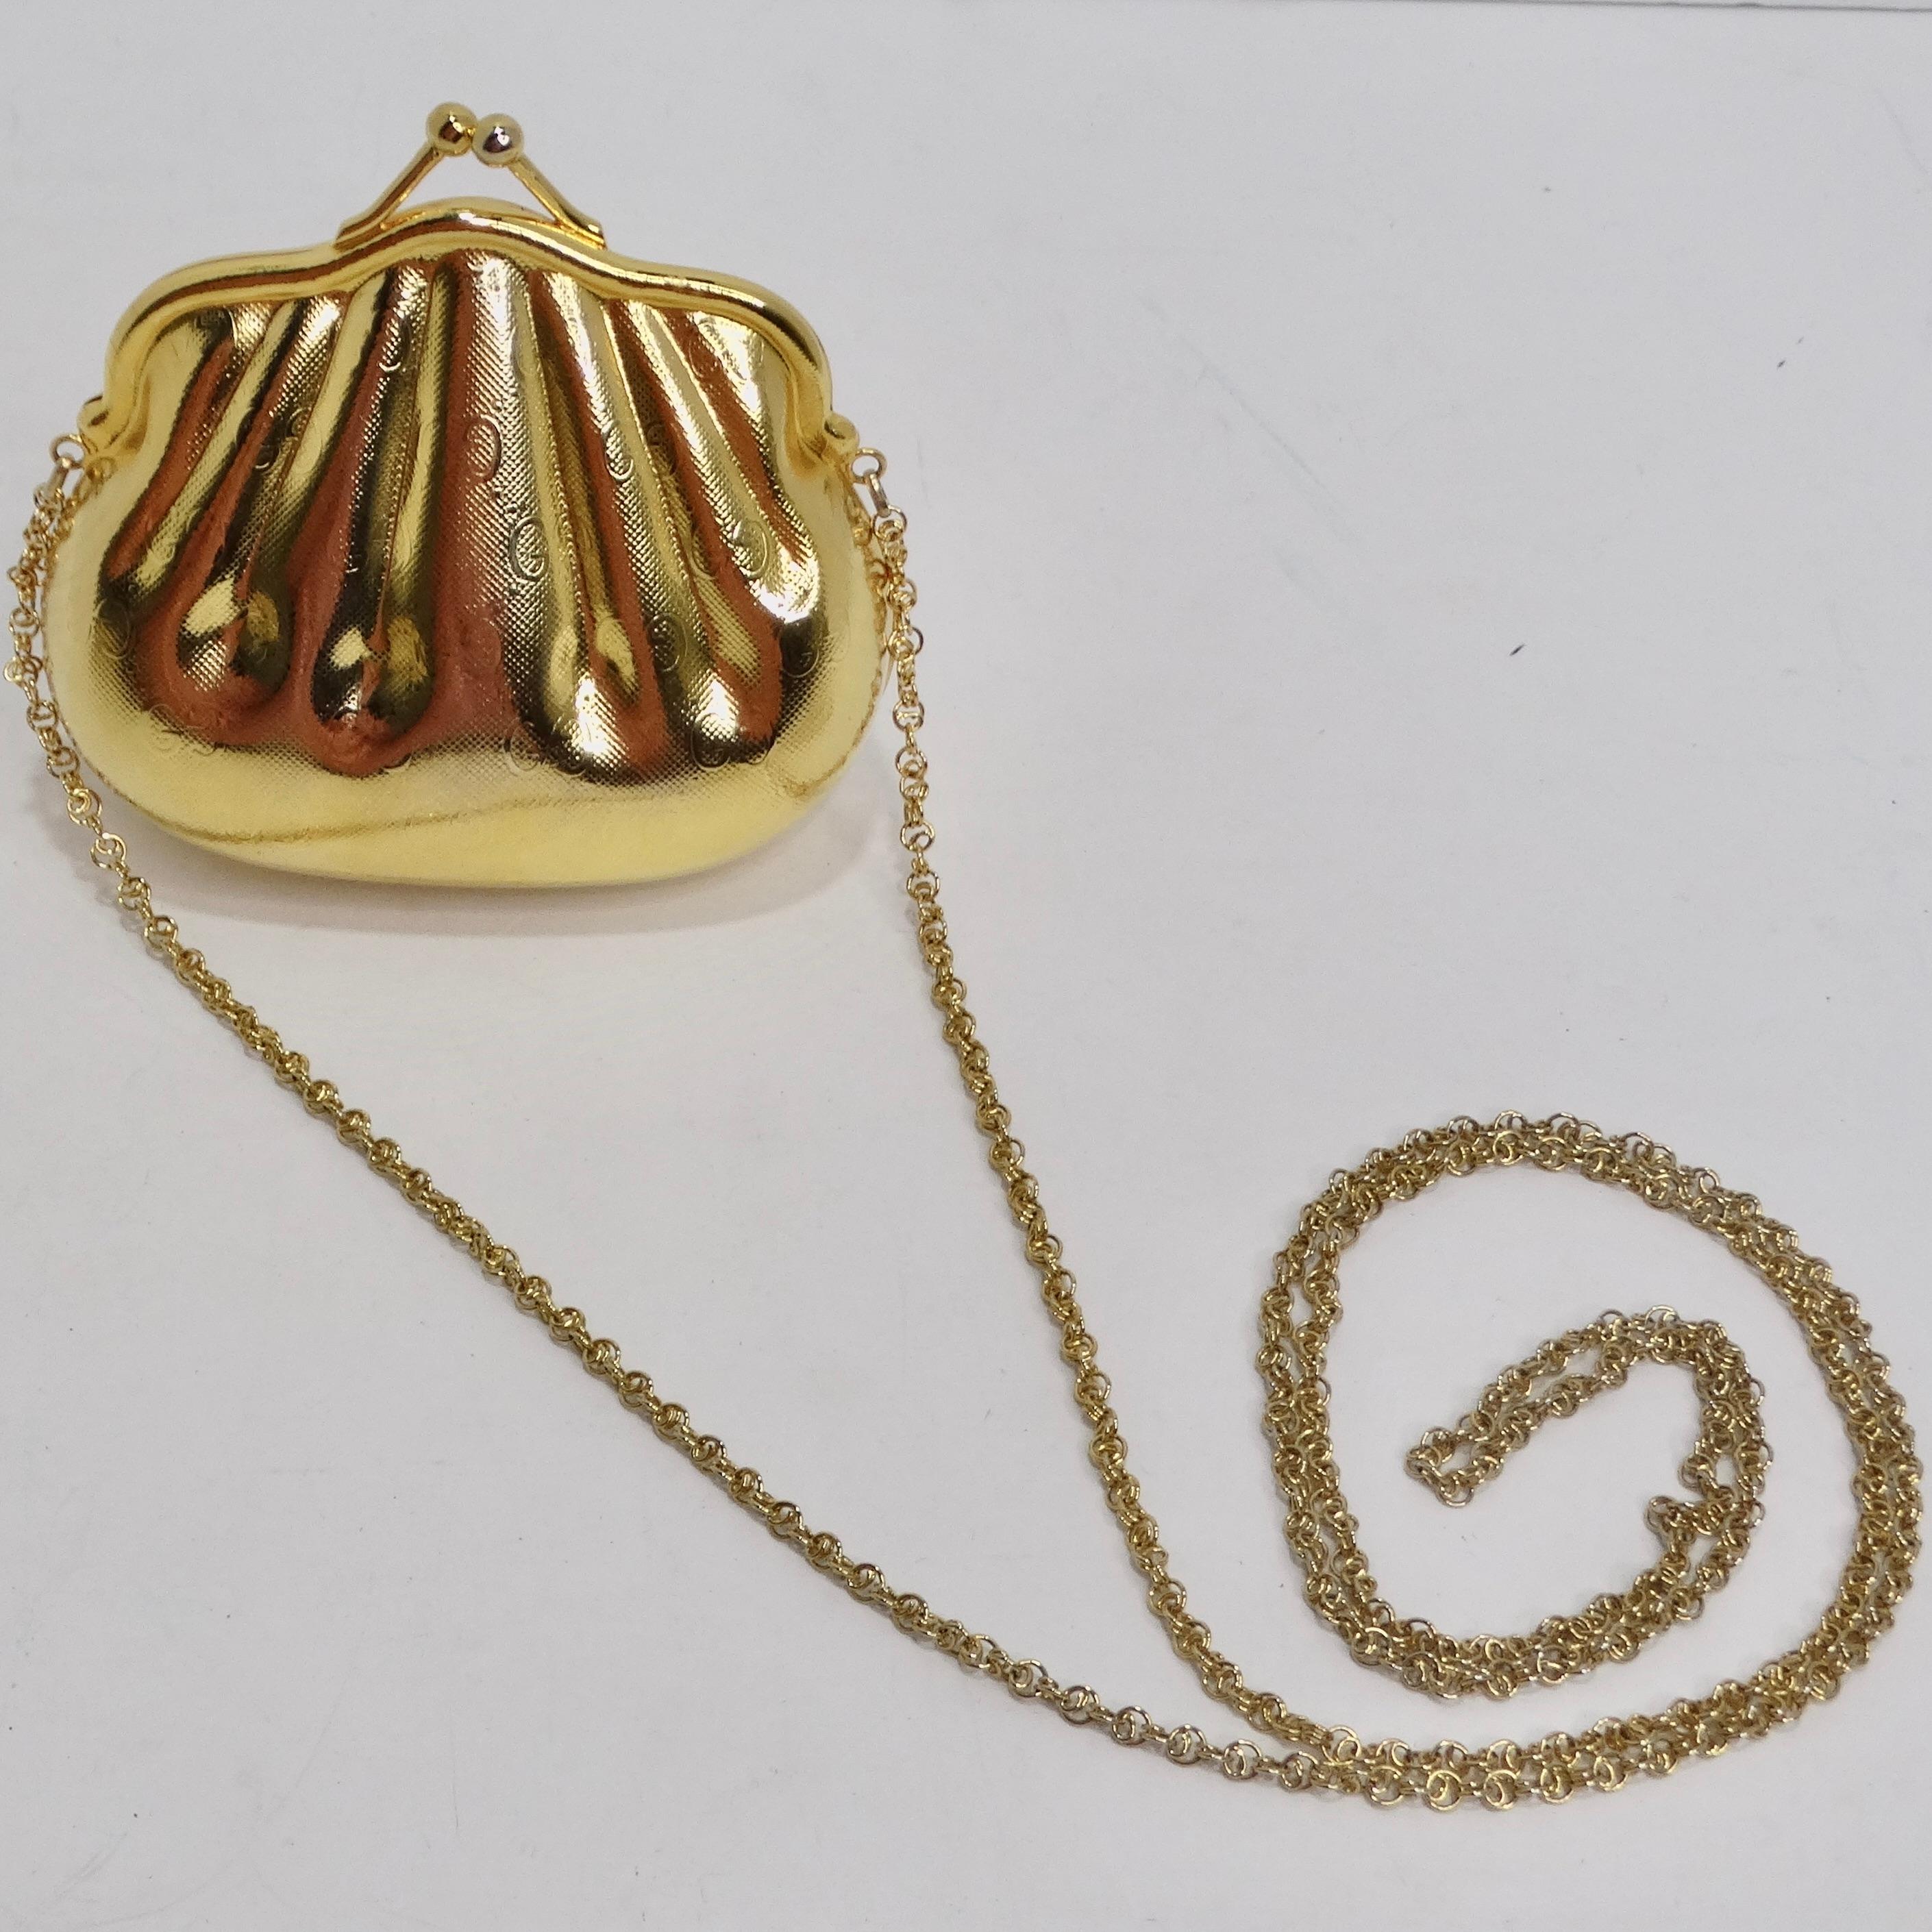 Gucci 1980s Gold Tone Metal Shell Minaudière Evening Bag For Sale 6